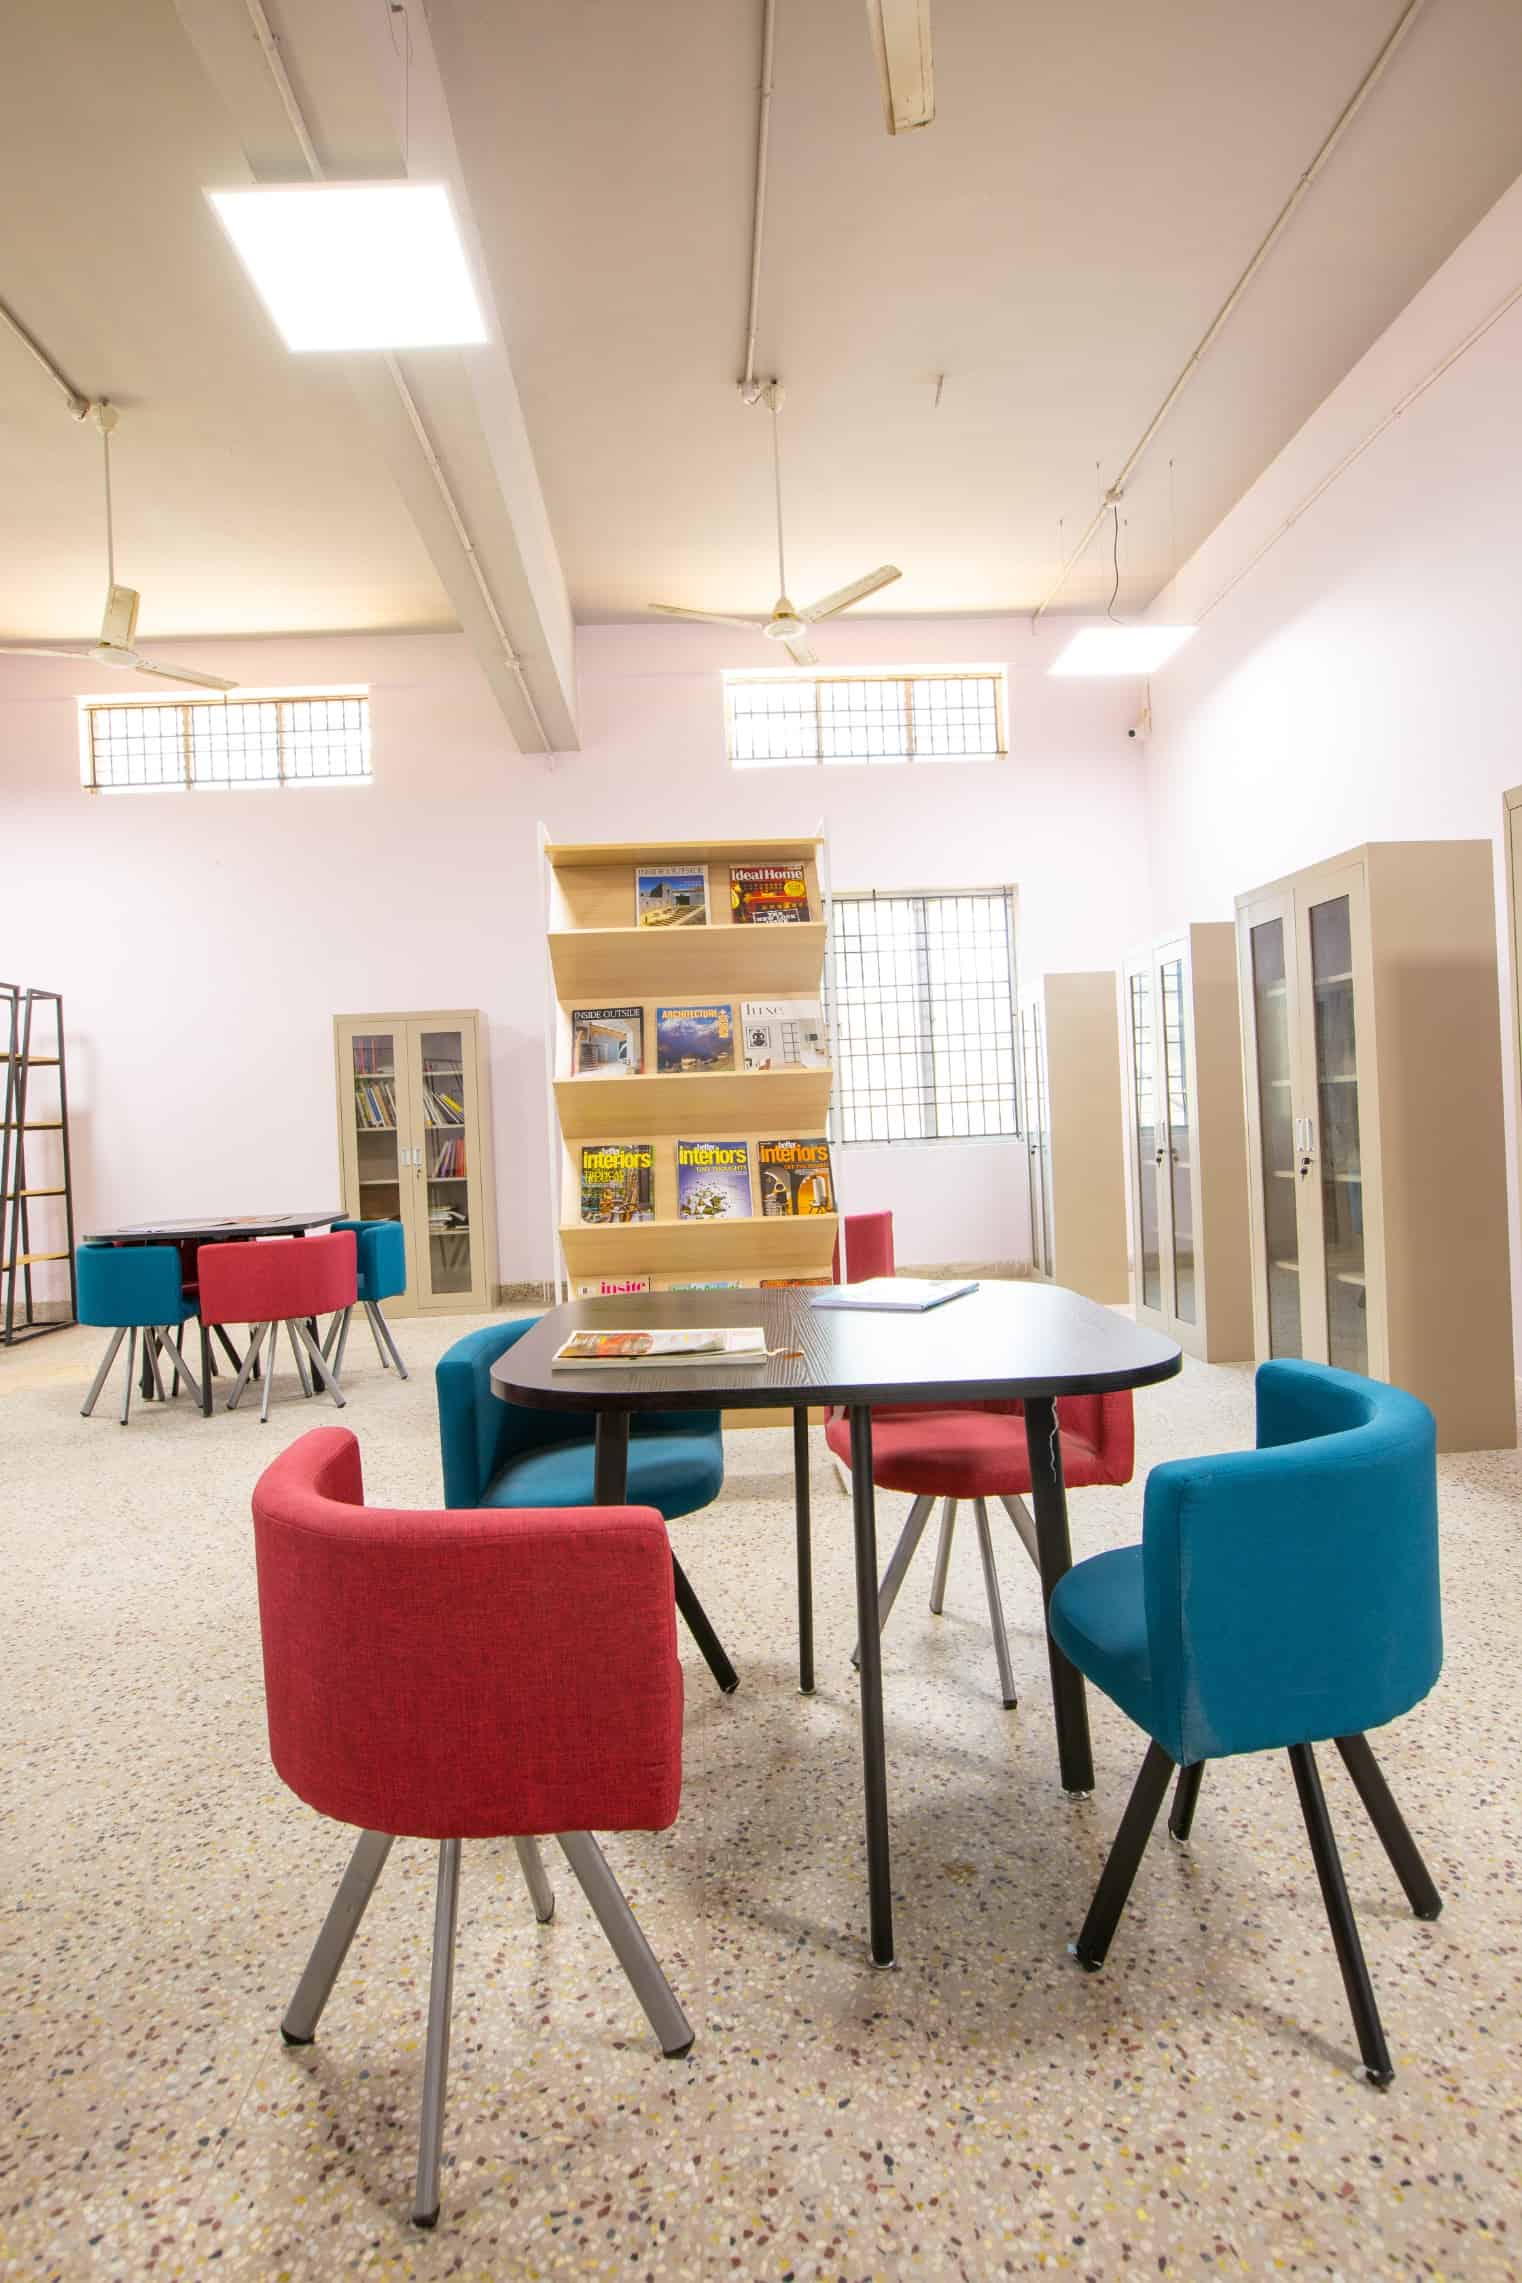 Library space with seating arrangements, books arranged in cupboards and open shelves